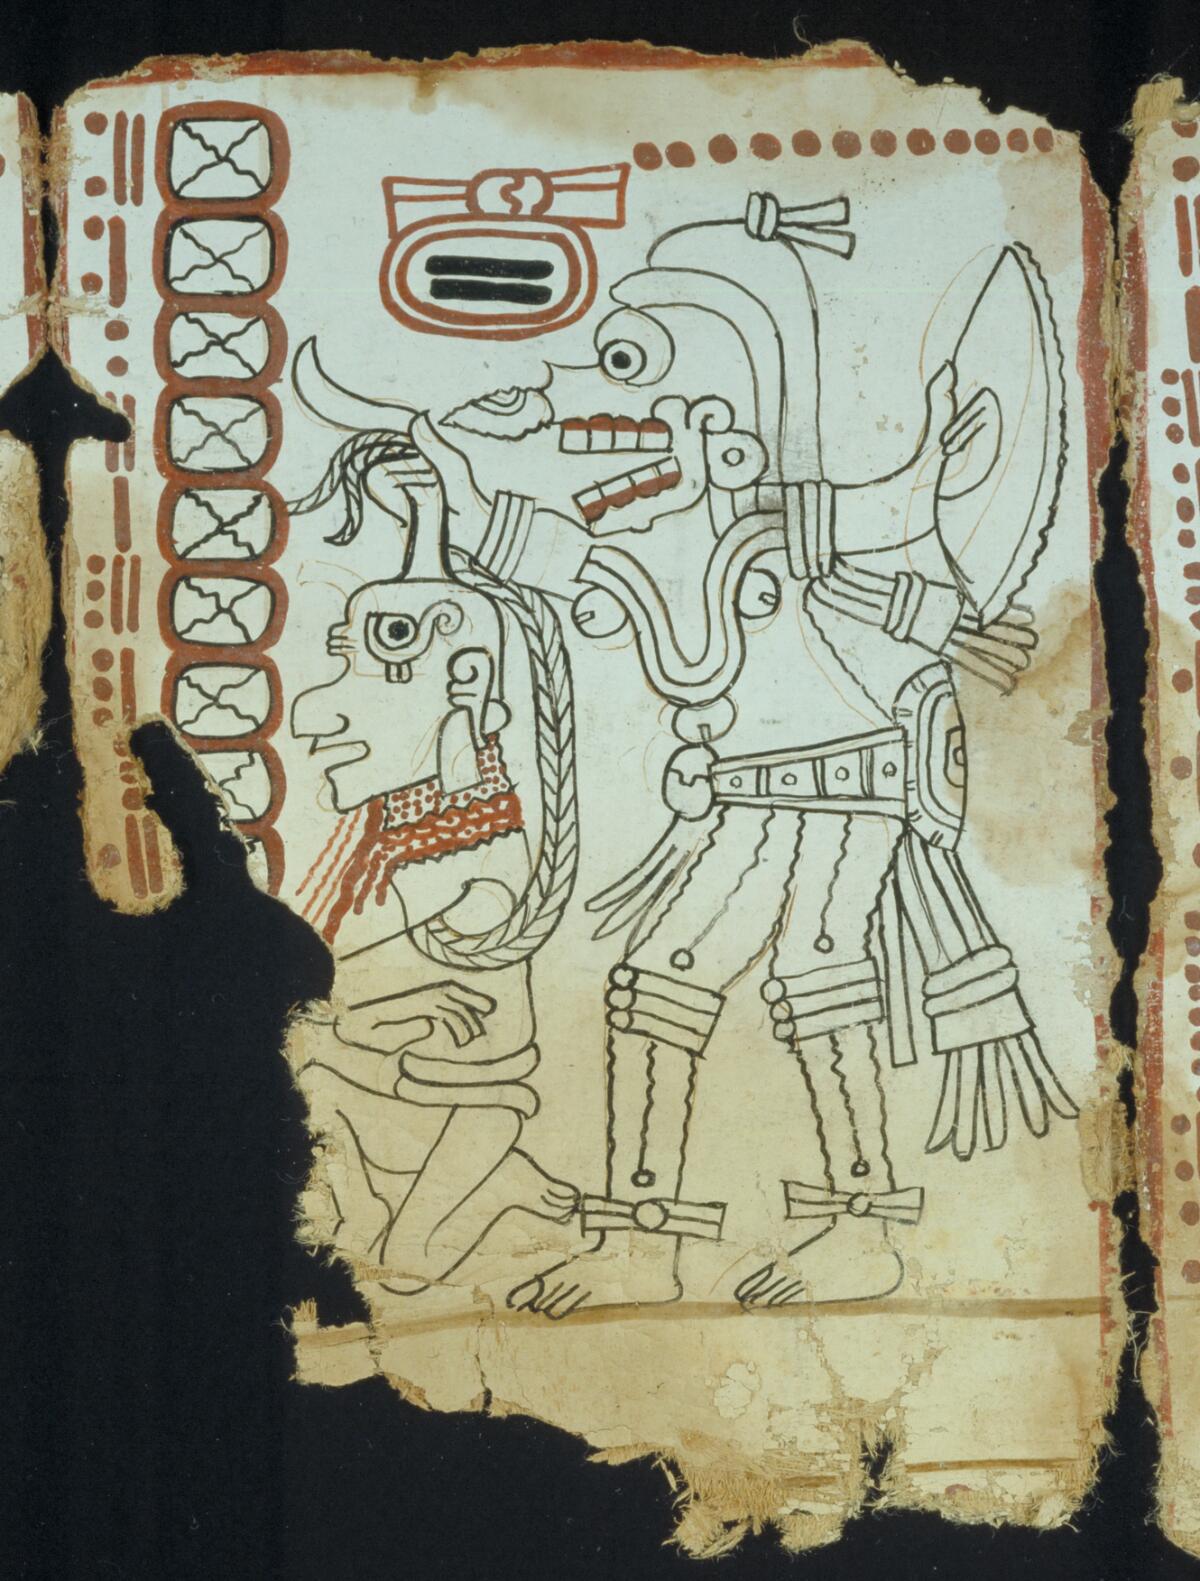 A scanned page of the Códice Maya shows a drawing of a Mayan death deity about to execute a kneeling figure.